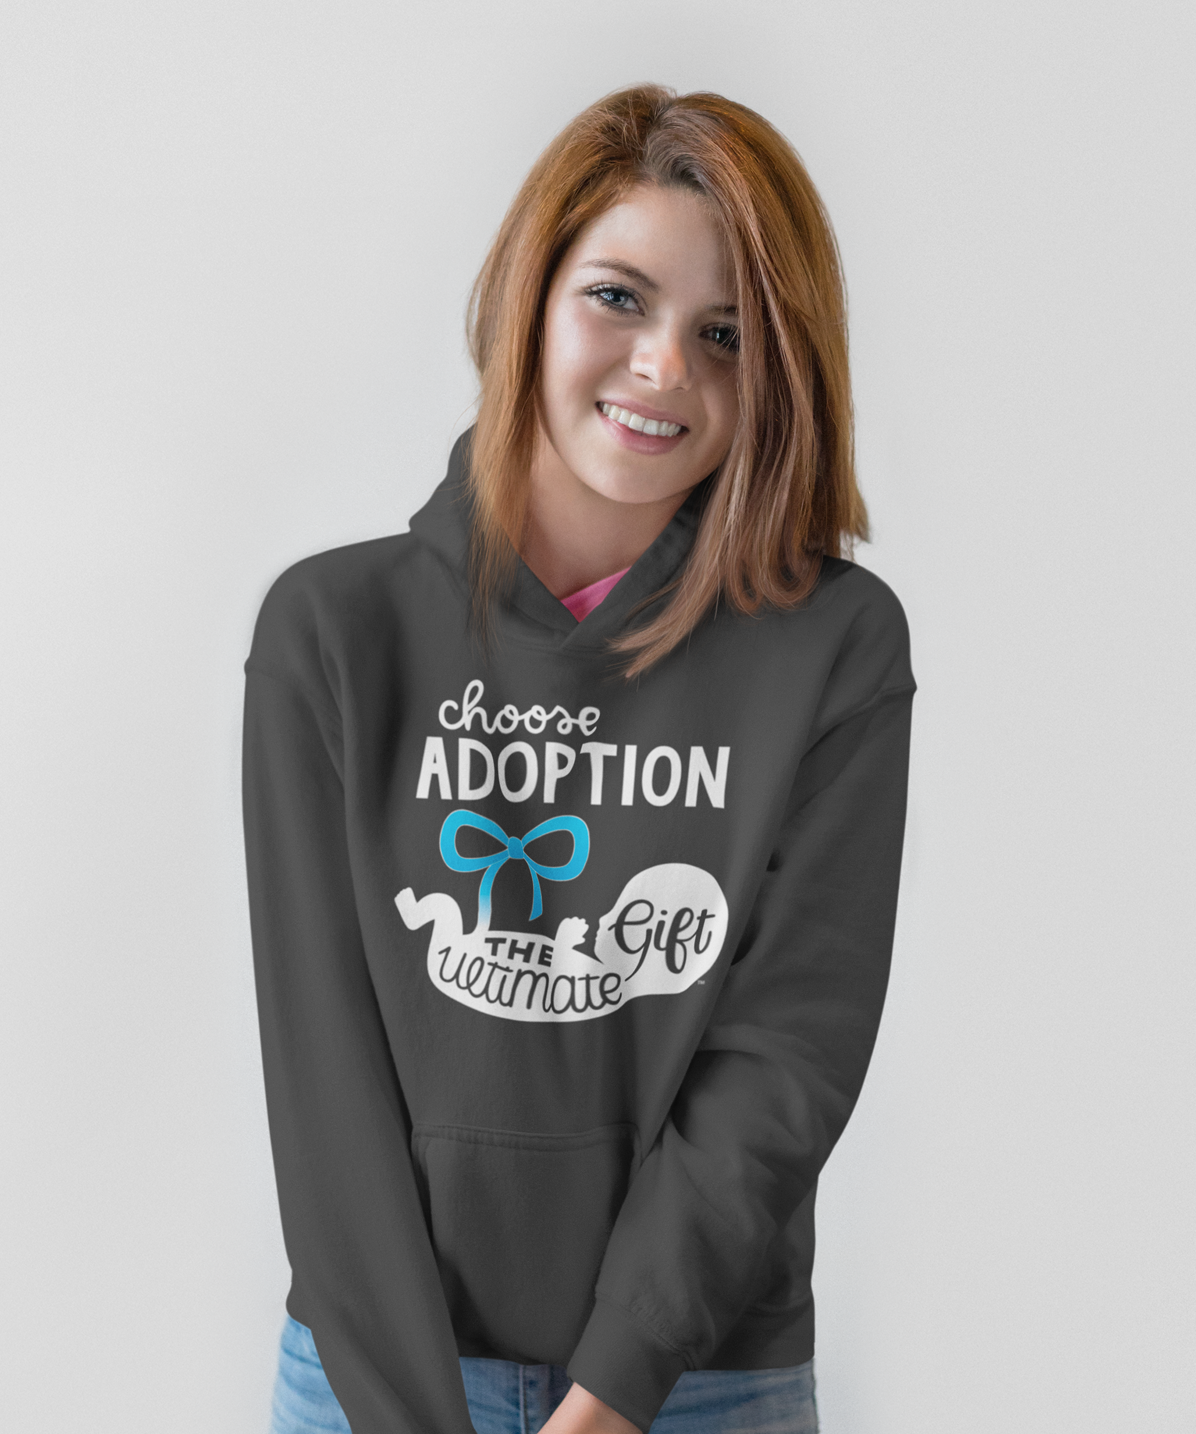 Fifteen percent of proceeds from LifeCulture's first 1,500 orders are going to an organization that helps families going through an unplanned pregnancy. (Photo: Life Culture)